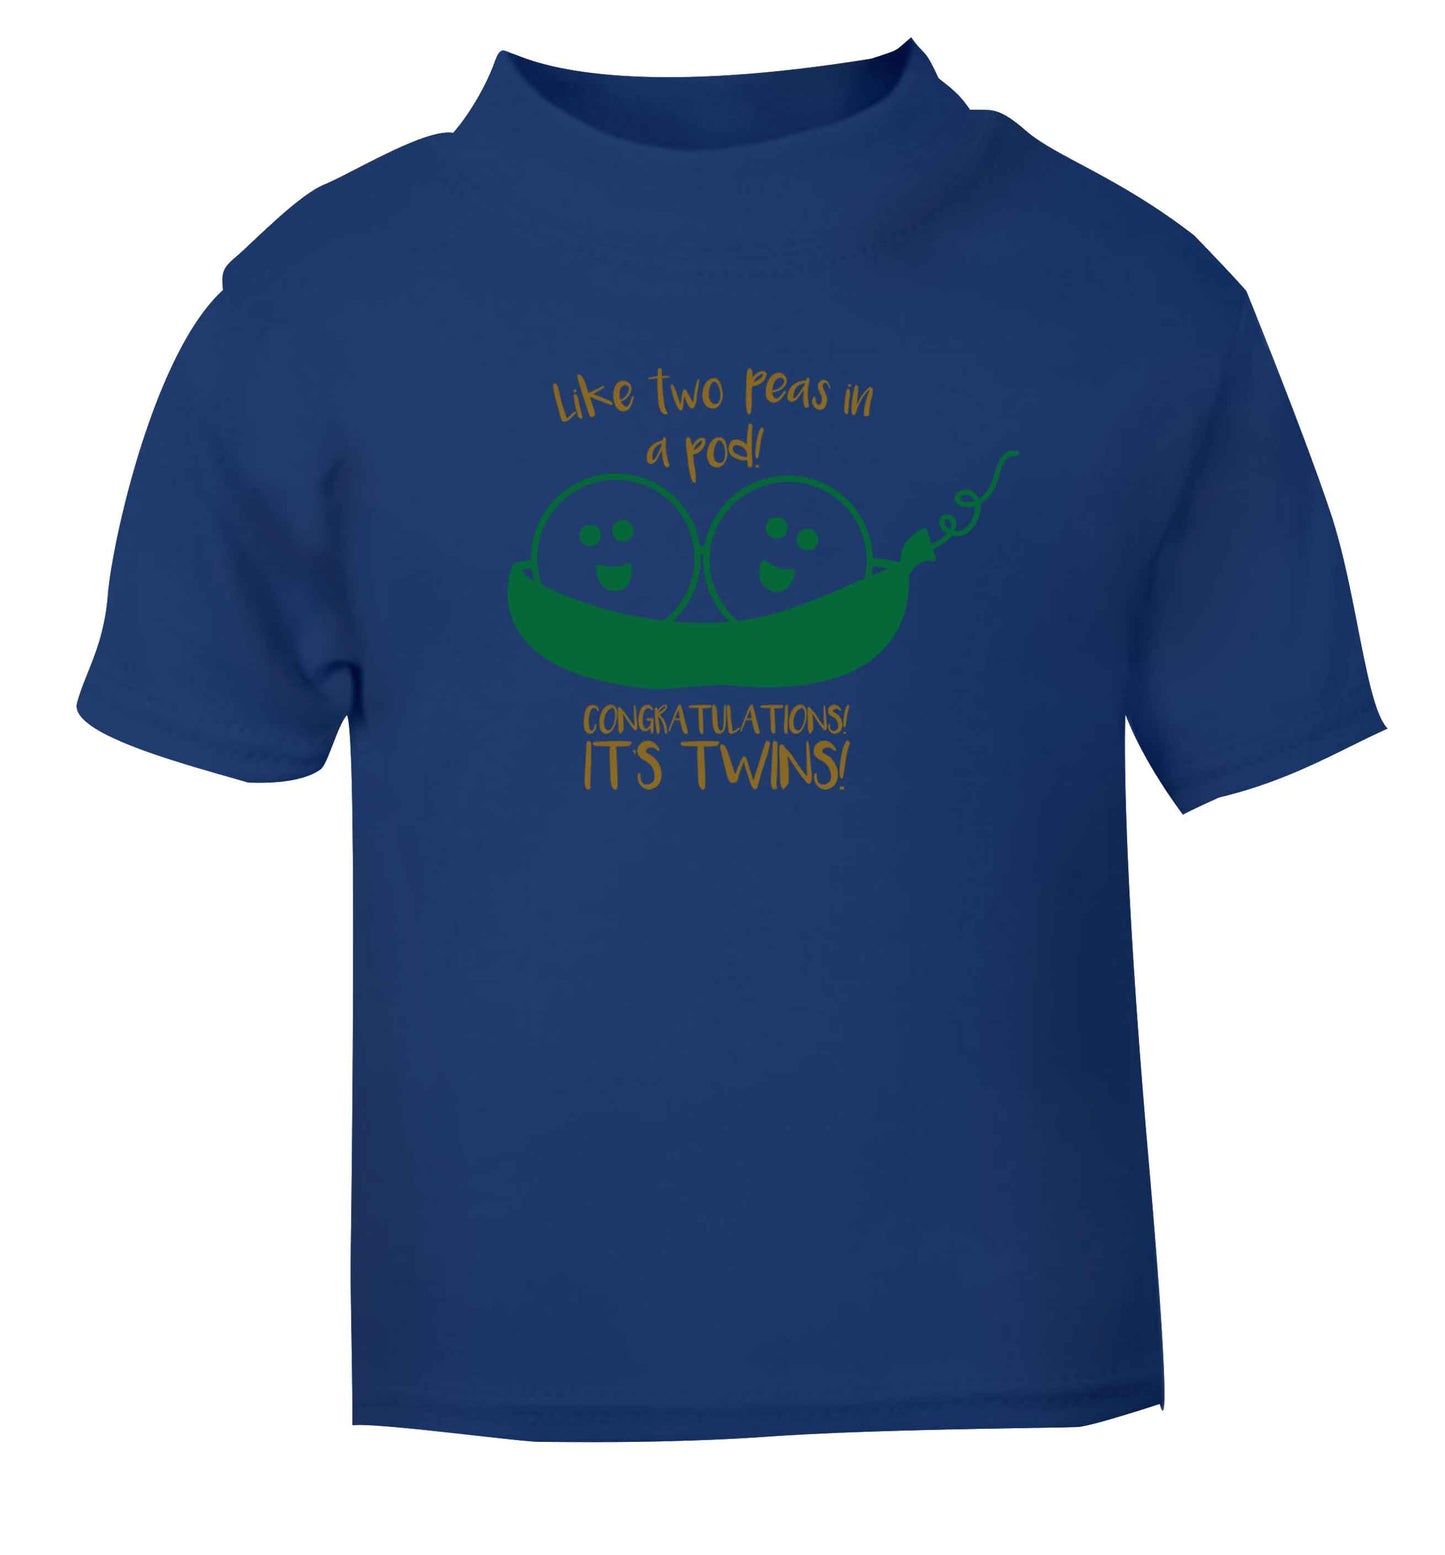 Like two peas in a pod! Congratulations it's twins! blue baby toddler Tshirt 2 Years